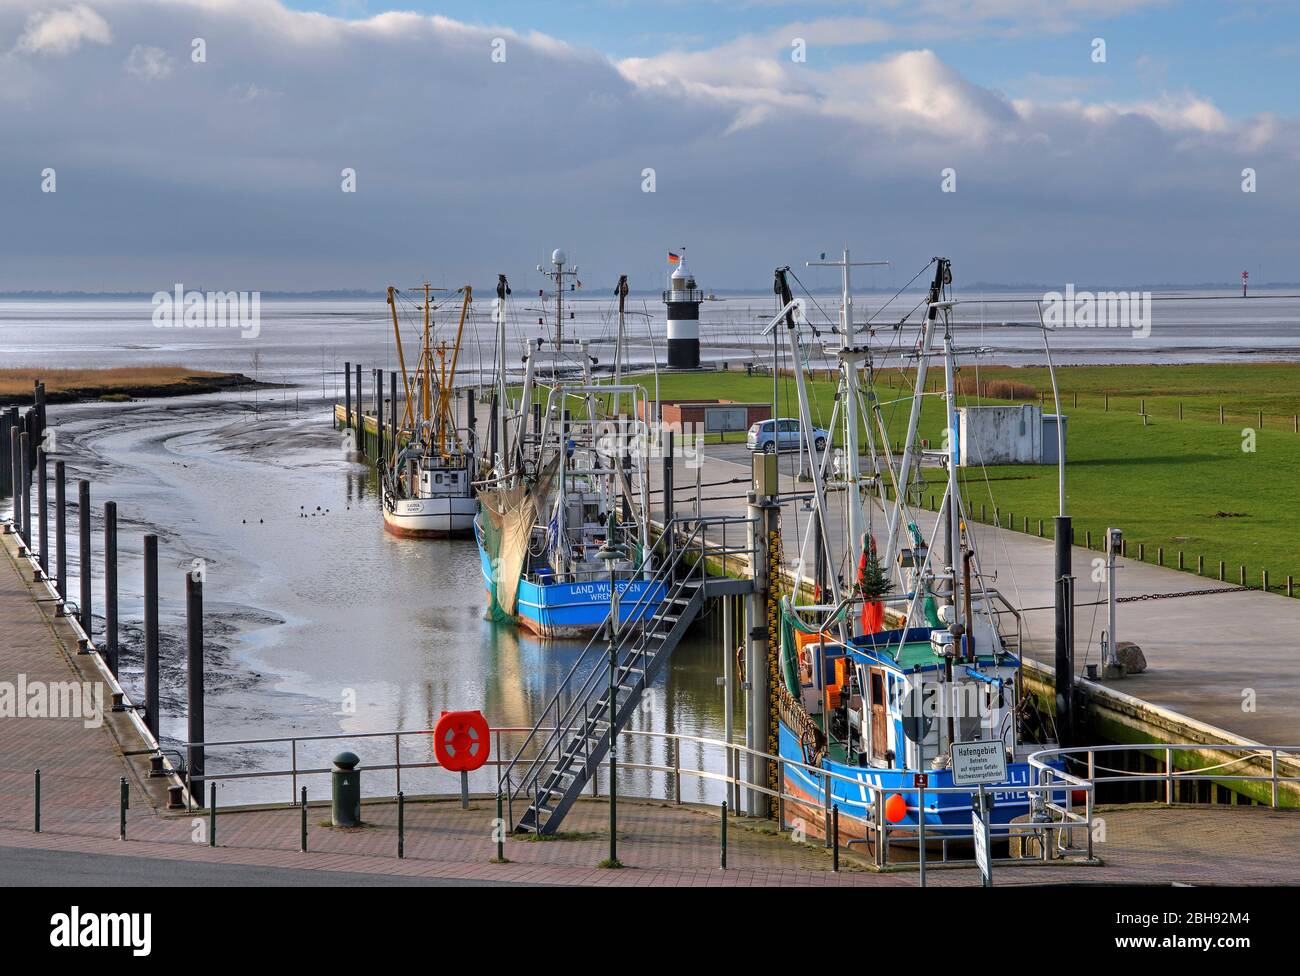 harbour at Wadden Sea with shrimp cutters and lighthouse 'Kleiner Preusse', Wremen, North Sea resort, Land Wursten, Weser estuary, North Sea coast, Lower Saxony, Northern Germany, Germany Stock Photo